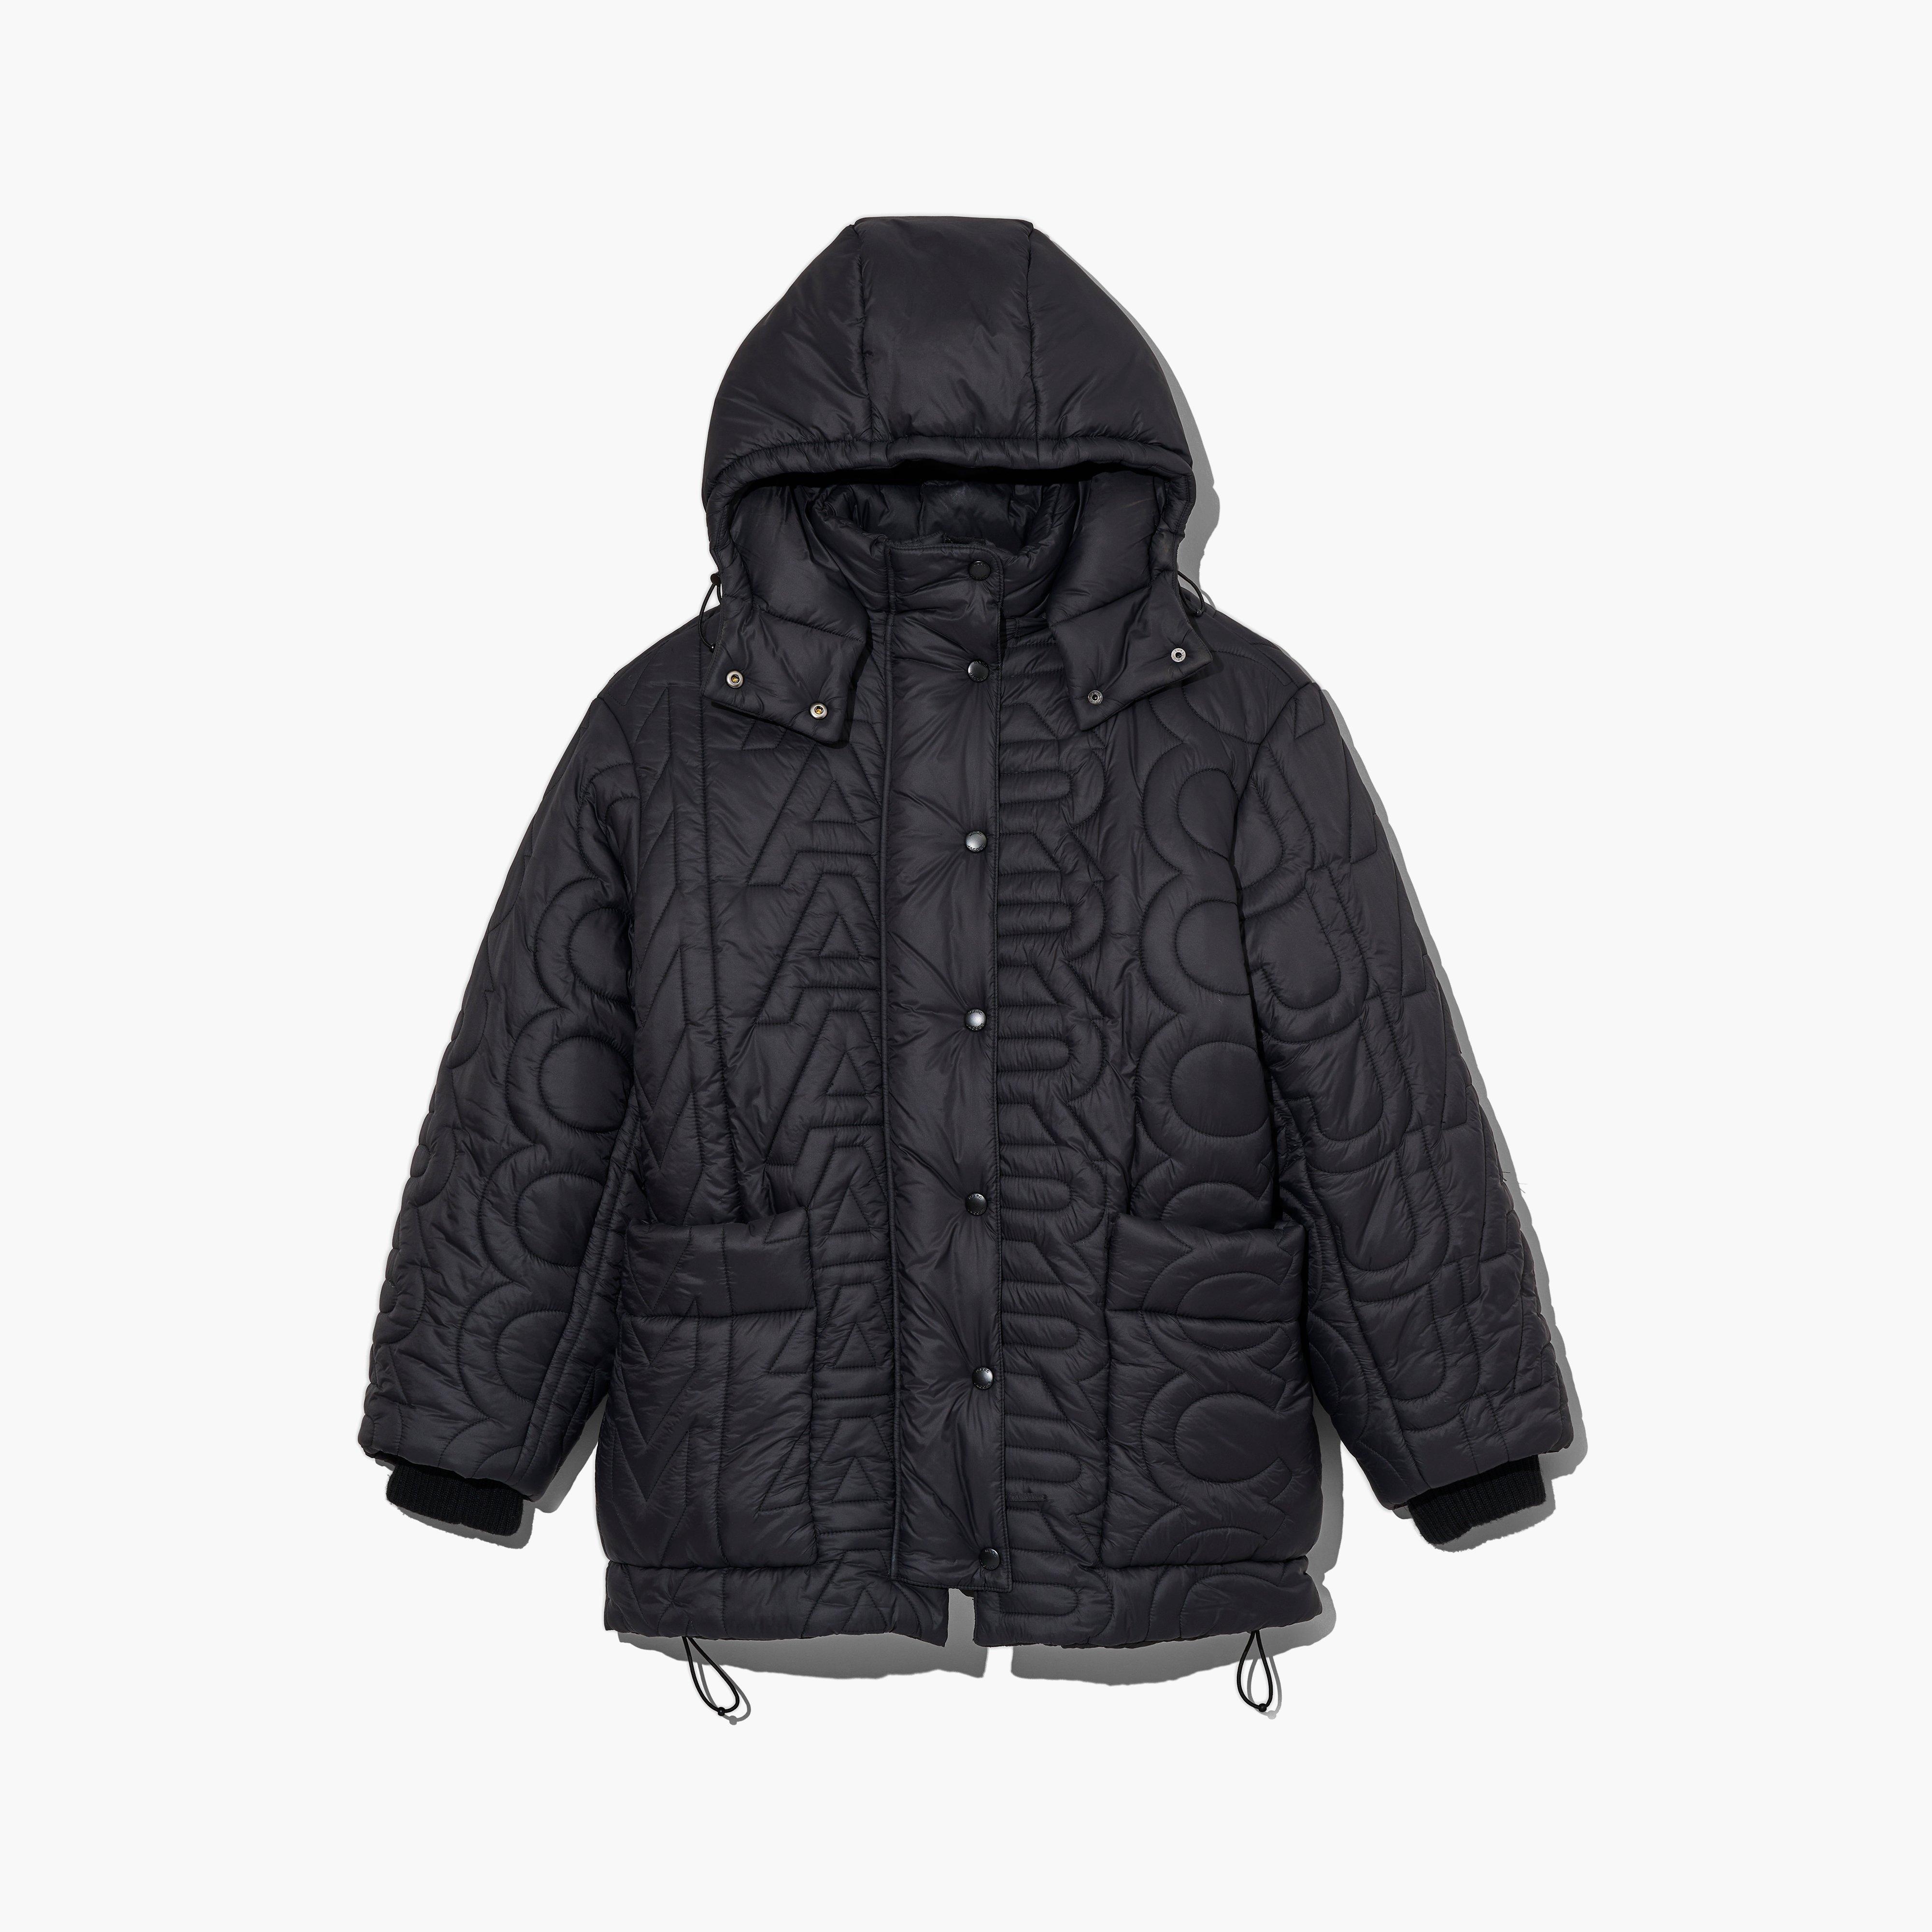 THE MONOGRAM QUILTED PUFFER JACKET - 1